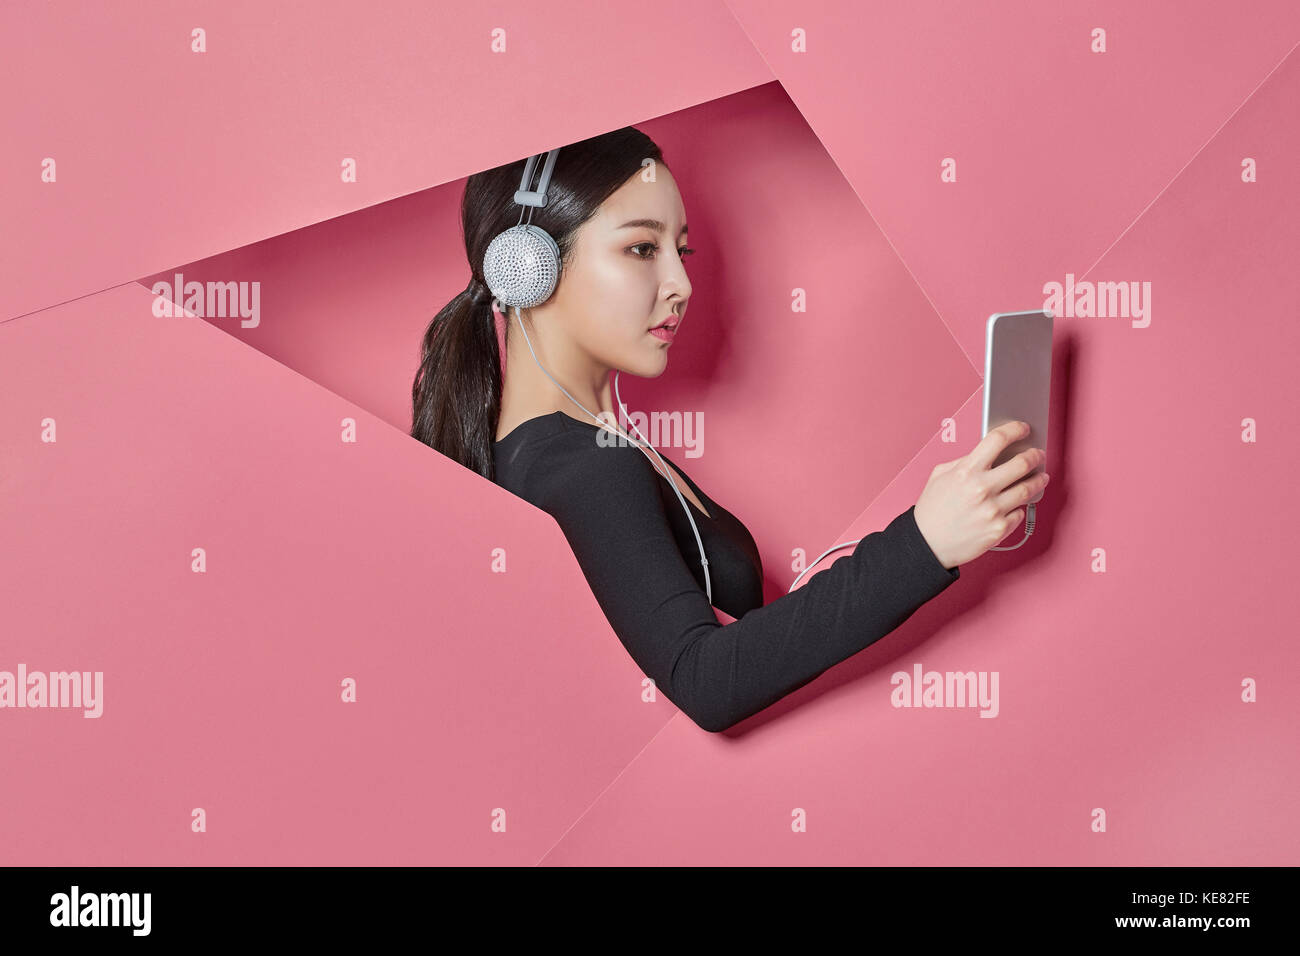 Side view portrait of young woman listening to music on smartphone Banque D'Images